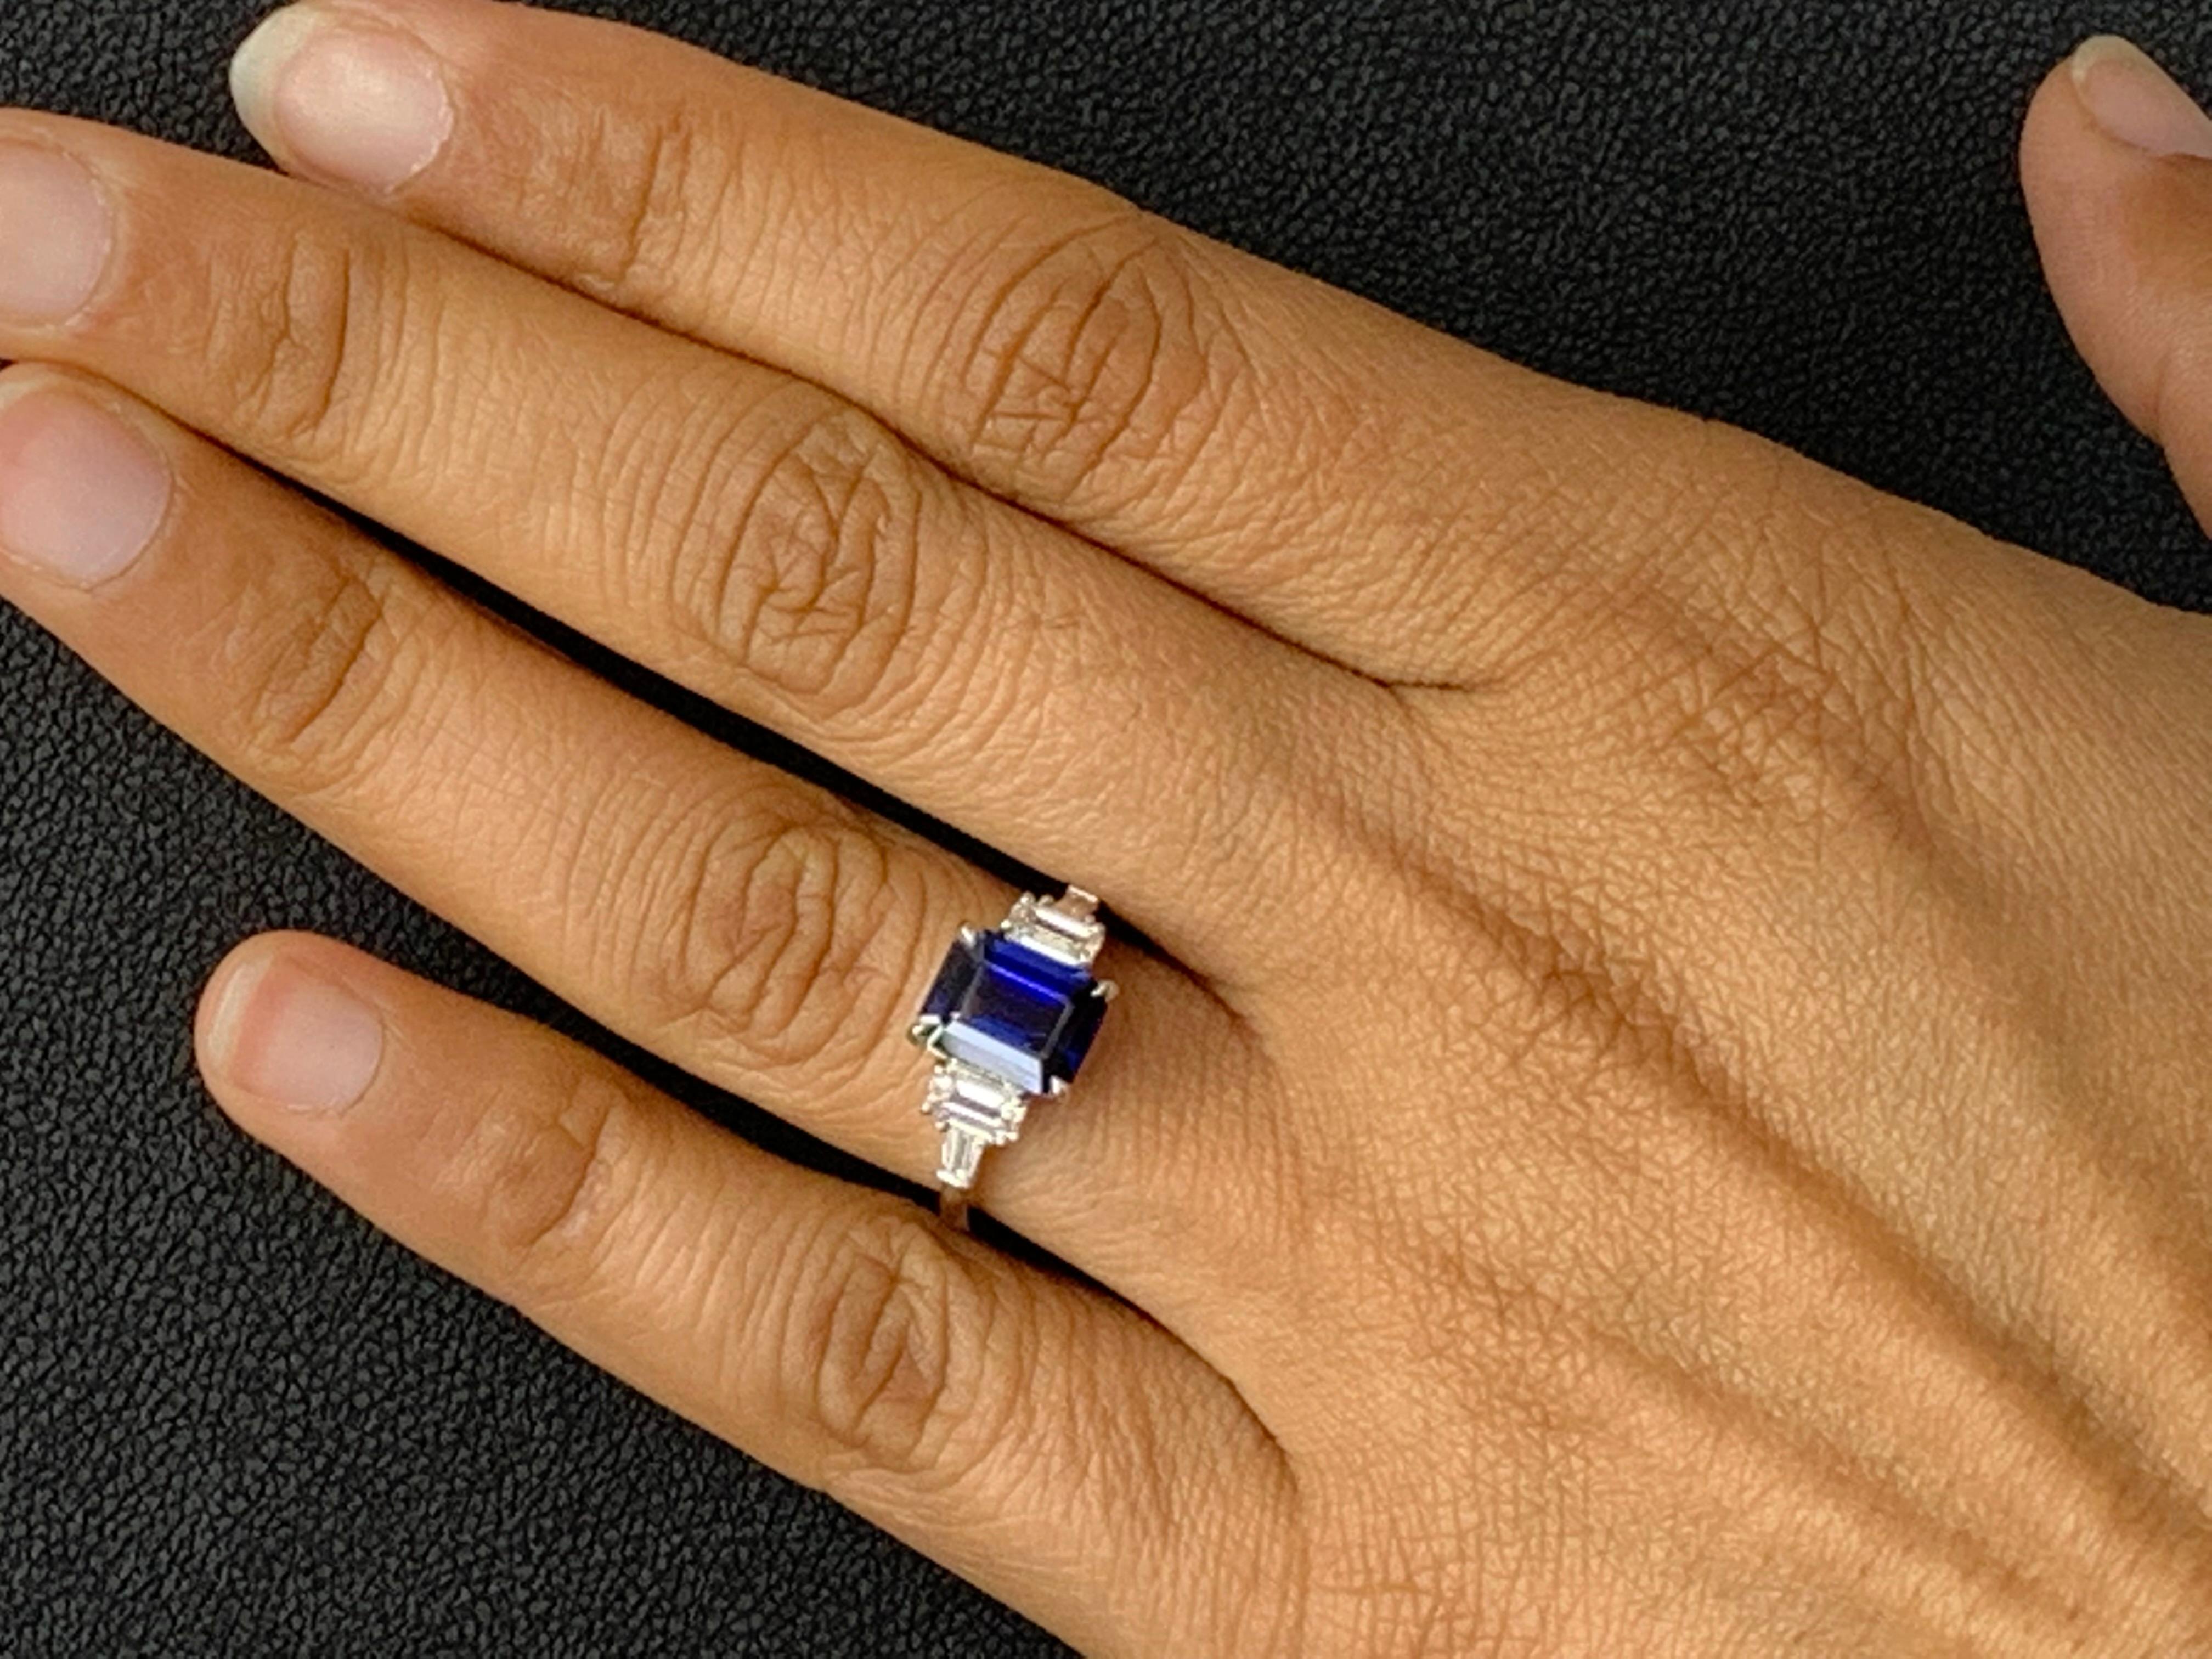 A stunning ring showcasing a rich intense emerald cut blue sapphire weighing 1.12 carats.  Flanking the center stone are two emerald-cut diamonds weighing 0.64 carats and two baguette diamonds on each side weighing 0.21 carats in total, Made in 14K